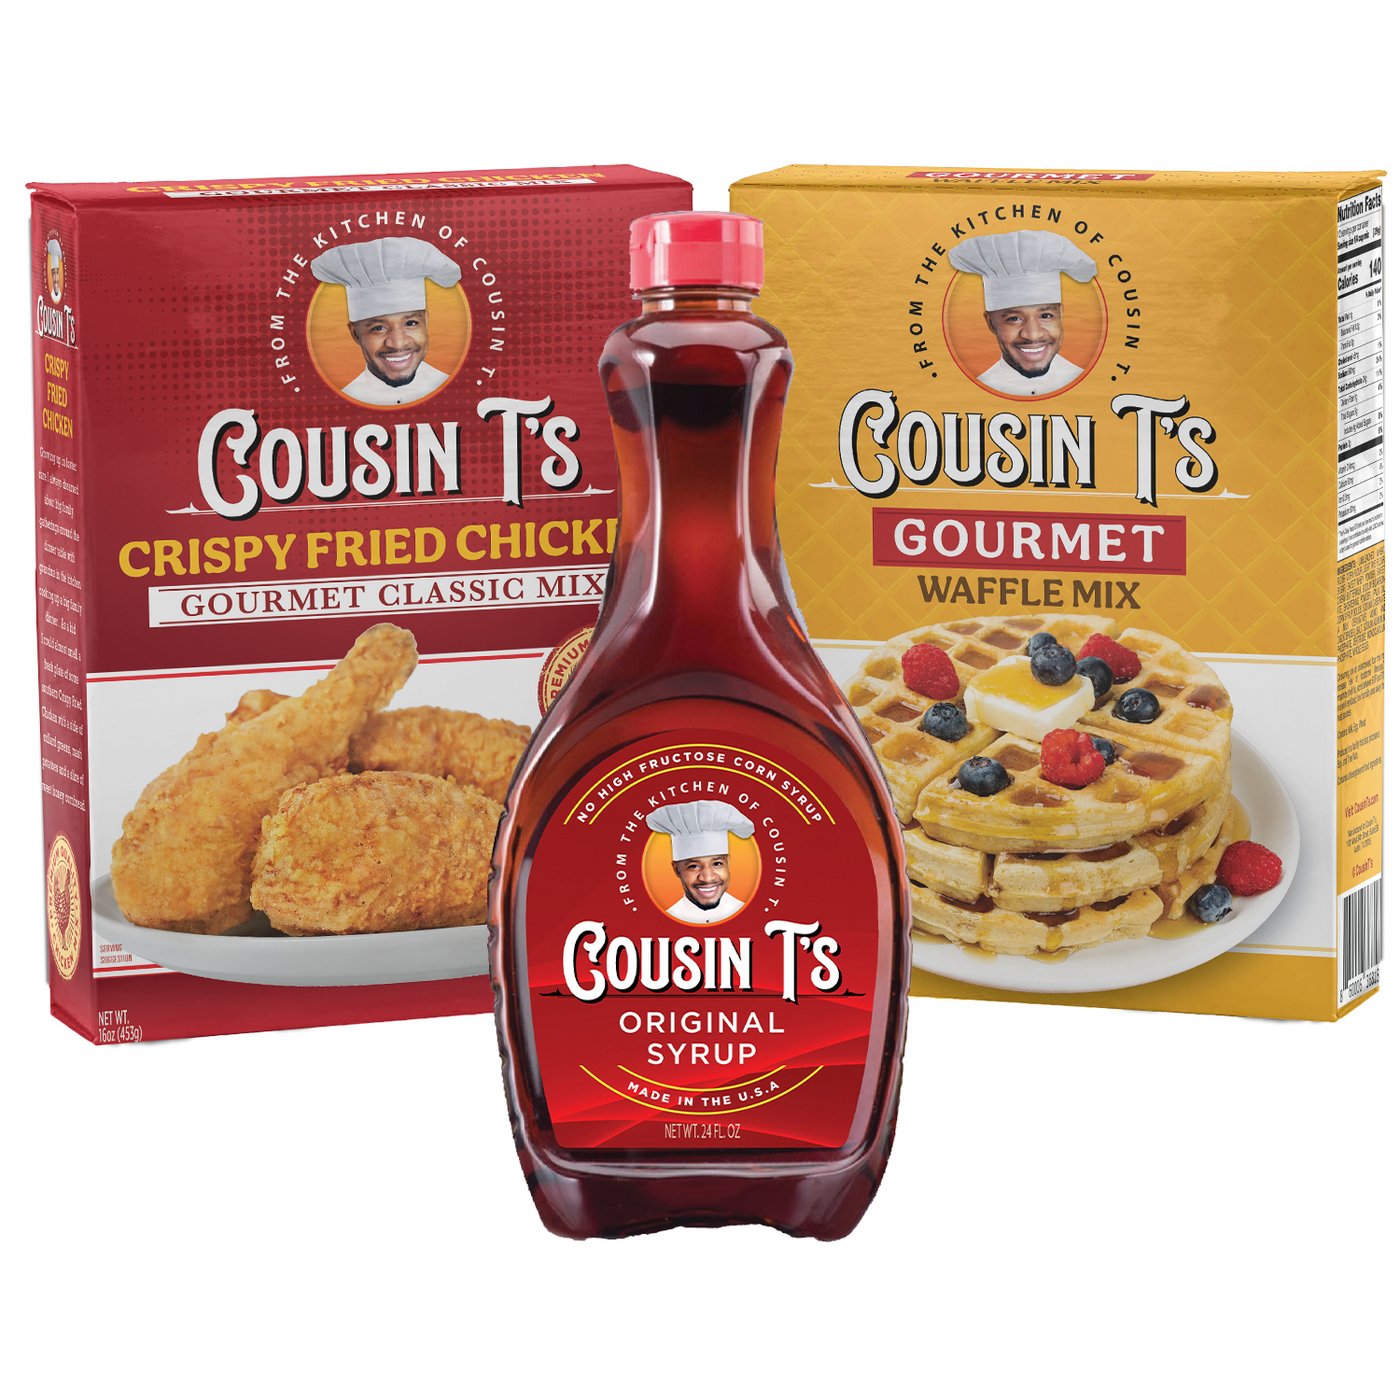 Cousin T's Gourmet Chicken, Waffle & Syrup Bundle